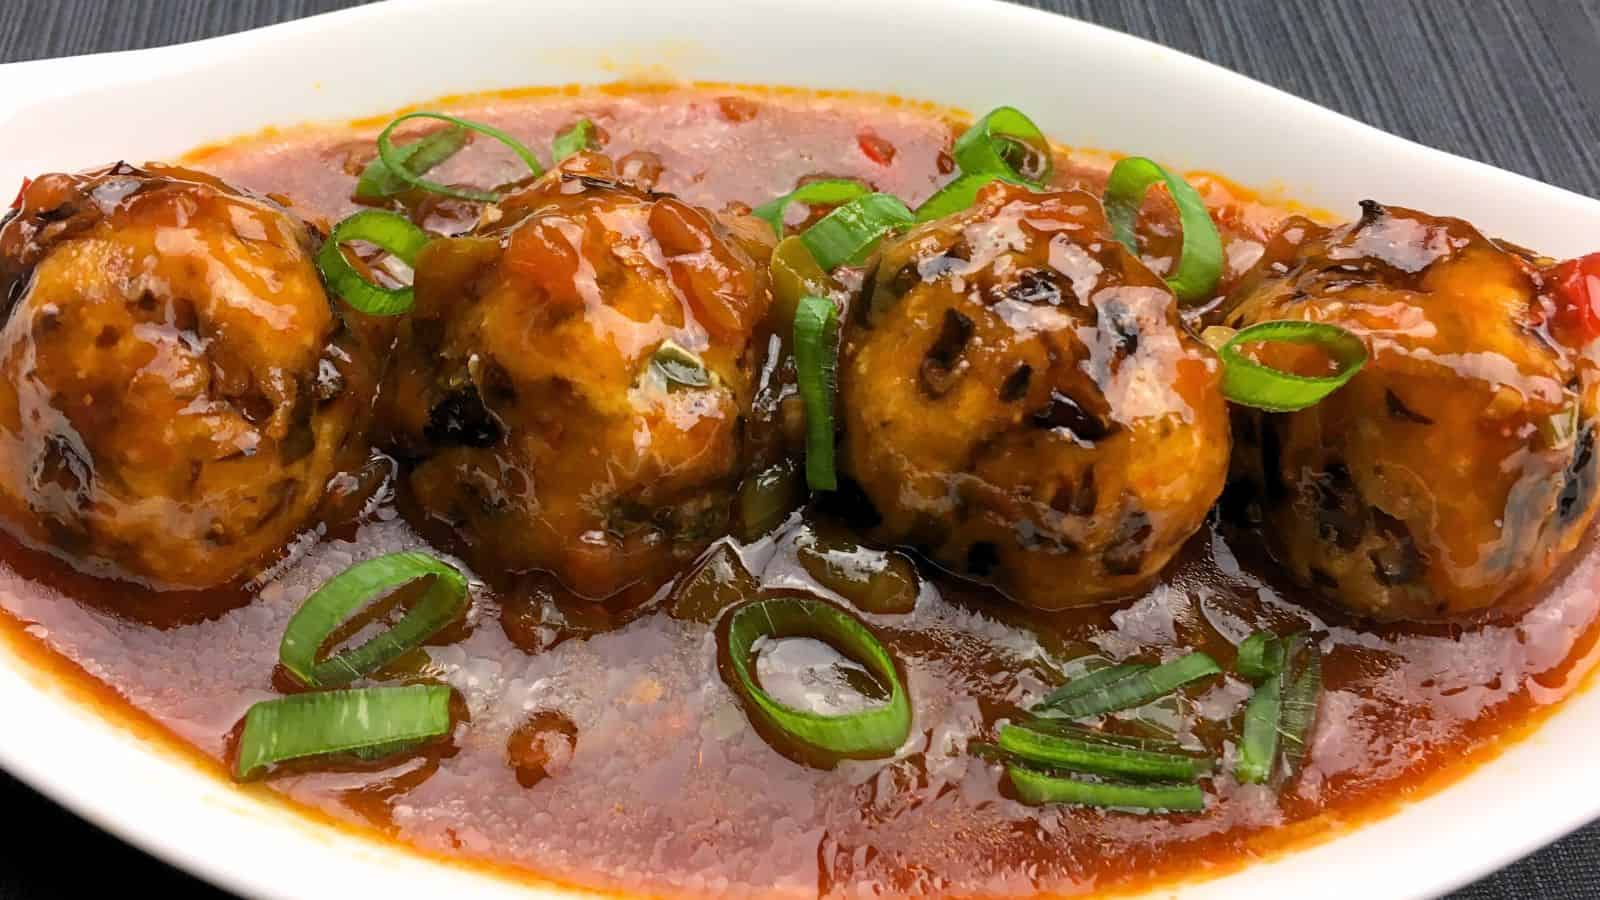 Four Manchurian meatballs in tomato sauce garnished with sliced green onions, served in a white oblong dish.